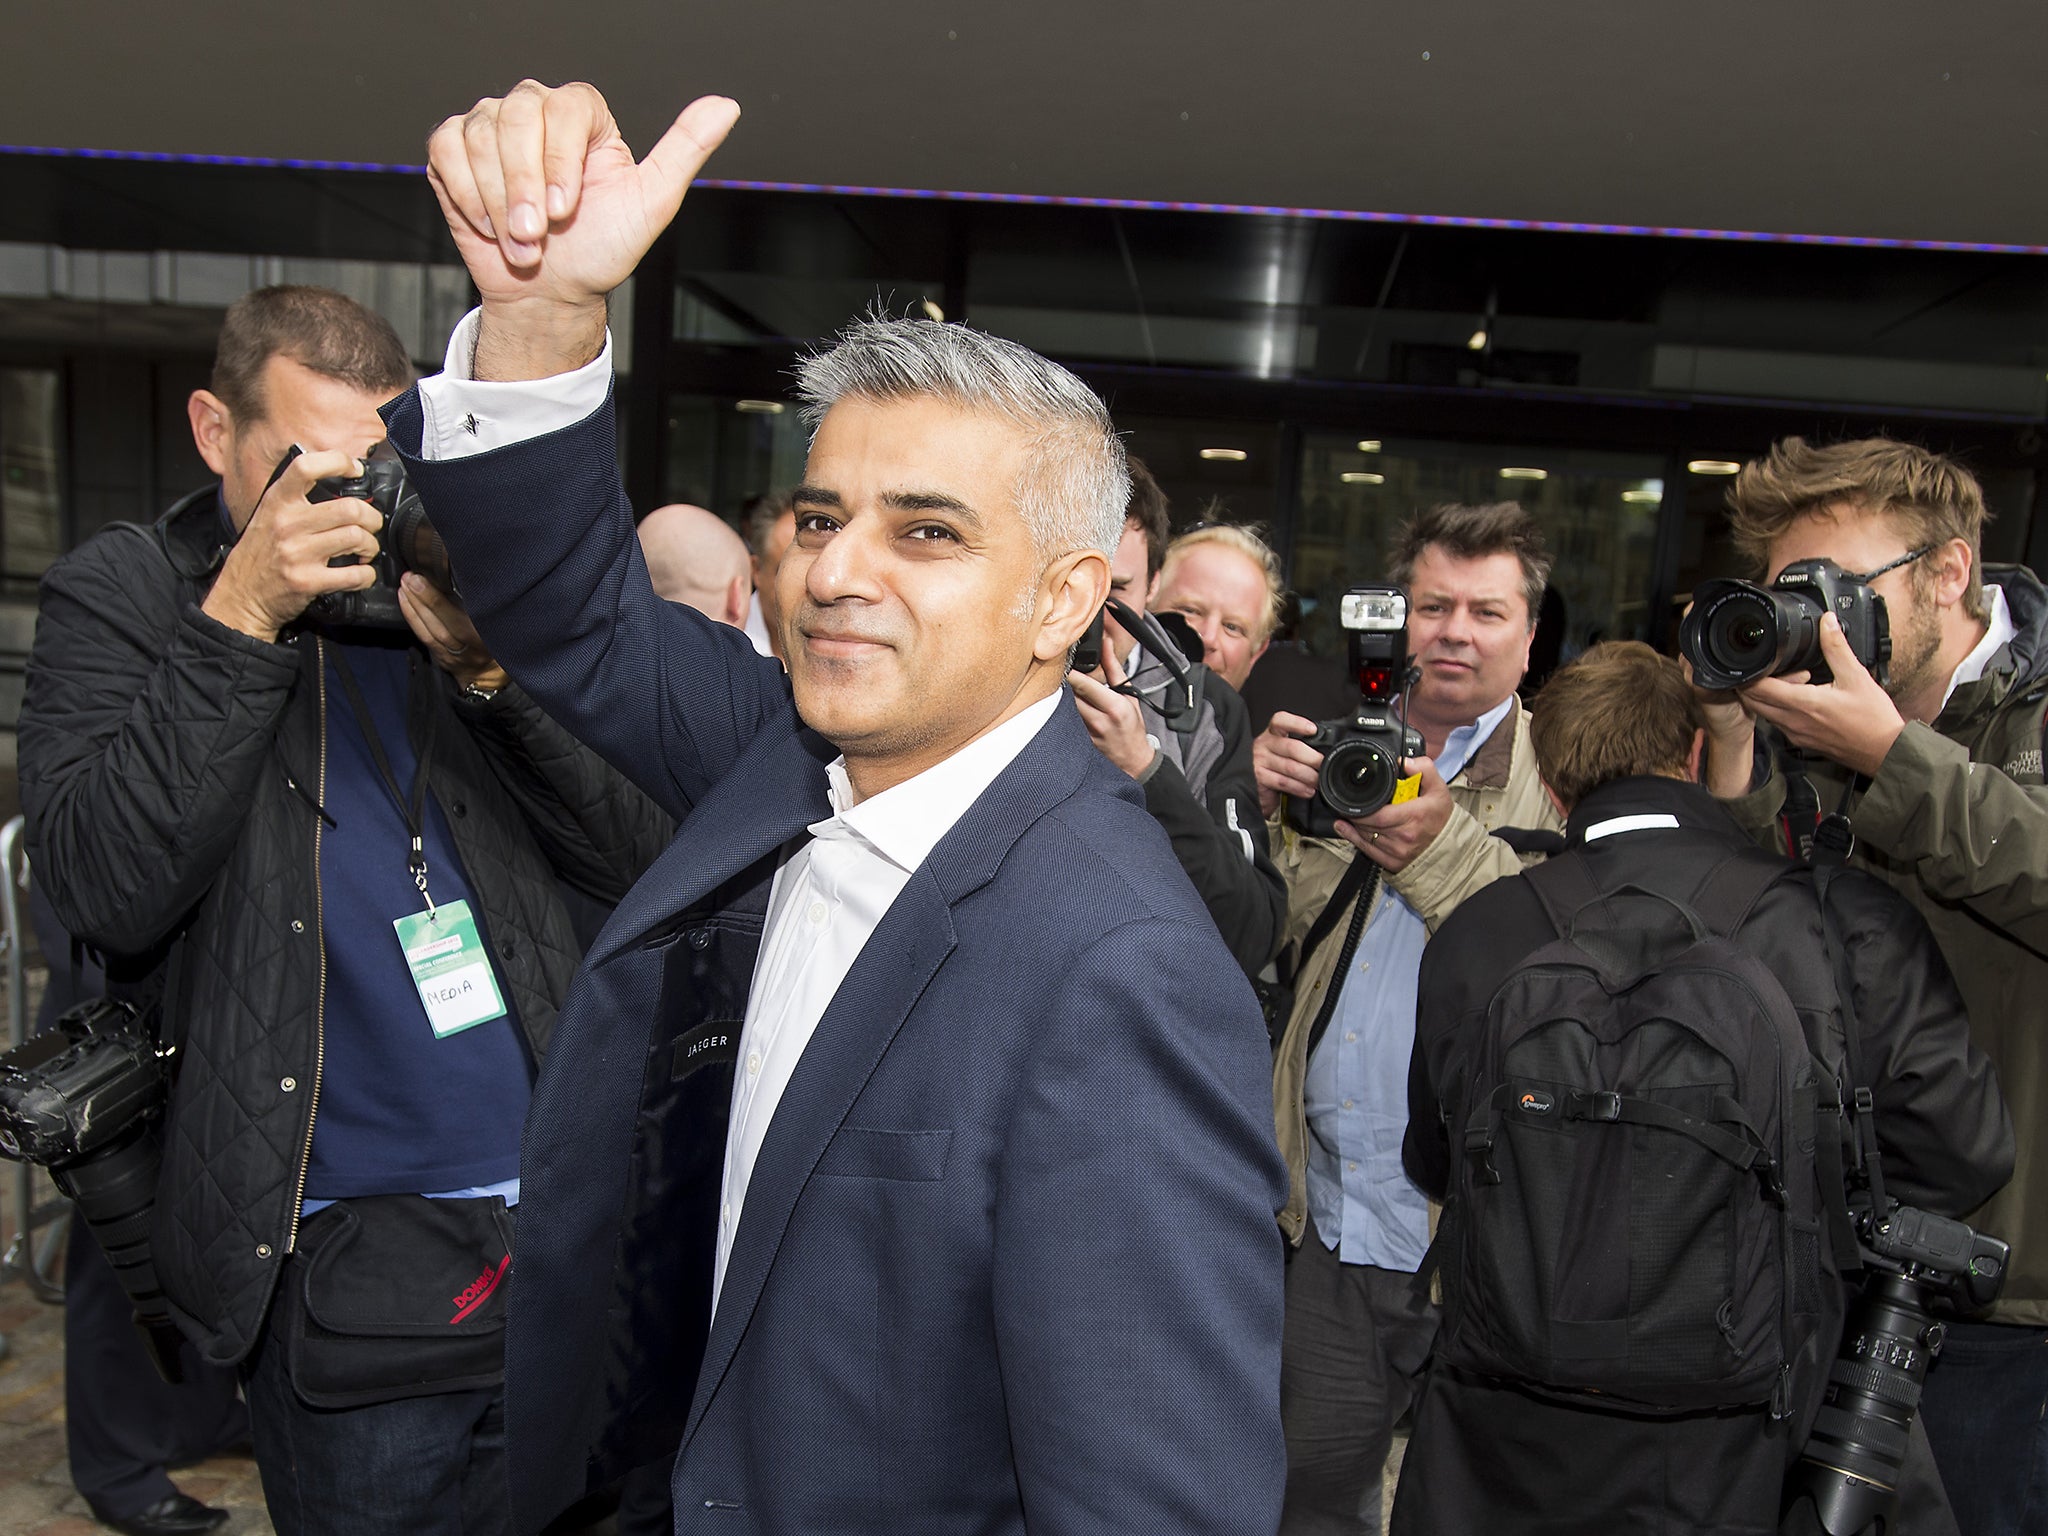 Sadiq Khan, the Labour candidate for London Mayor, has been accused of being linked to extremists. Would that happen to a white candidate?